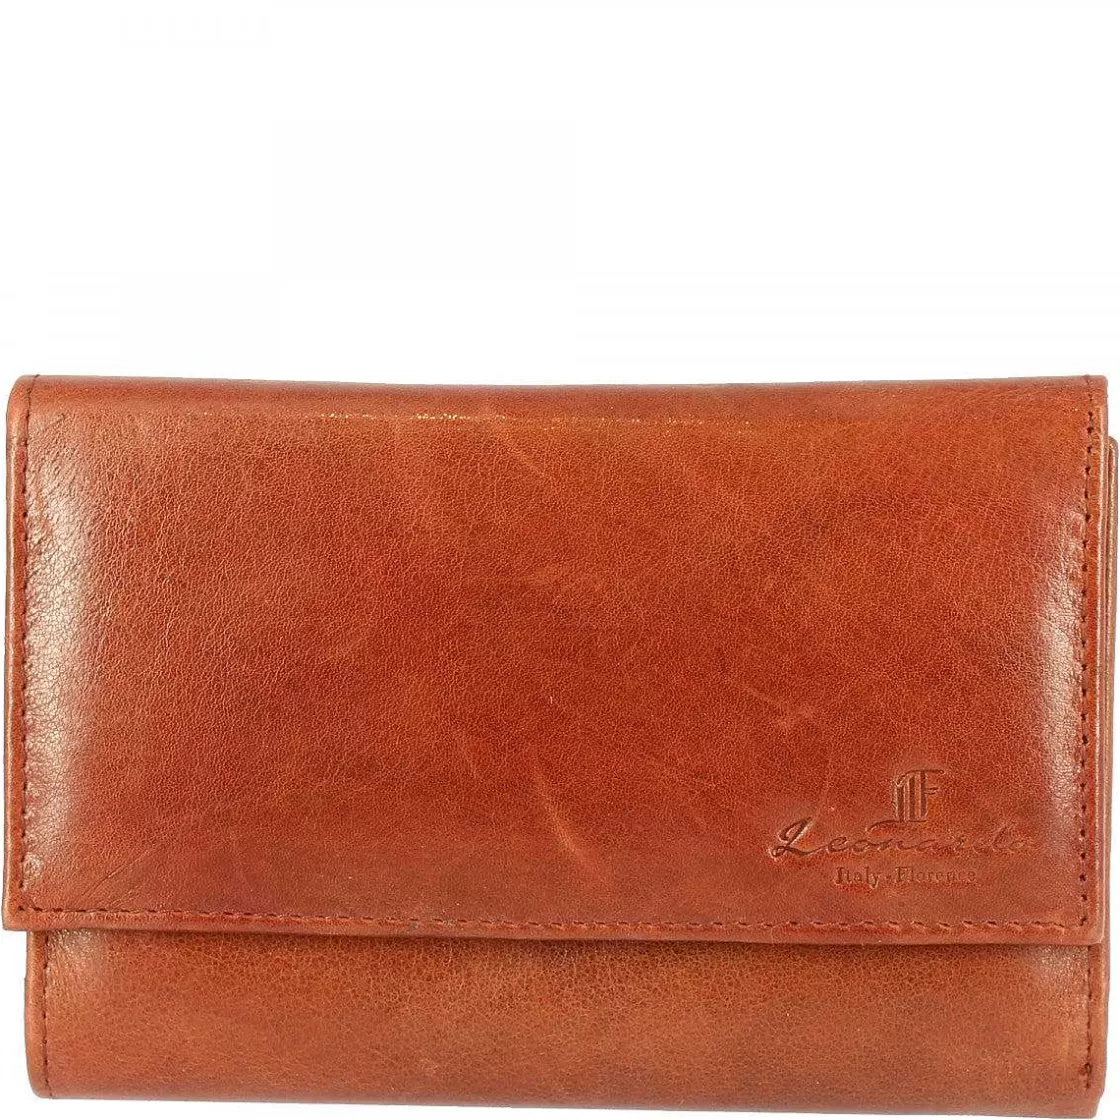 Leonardo Sauvage Women'S Wallet In Red Calfskin For Cards And Banknotes With Button Closure Clearance